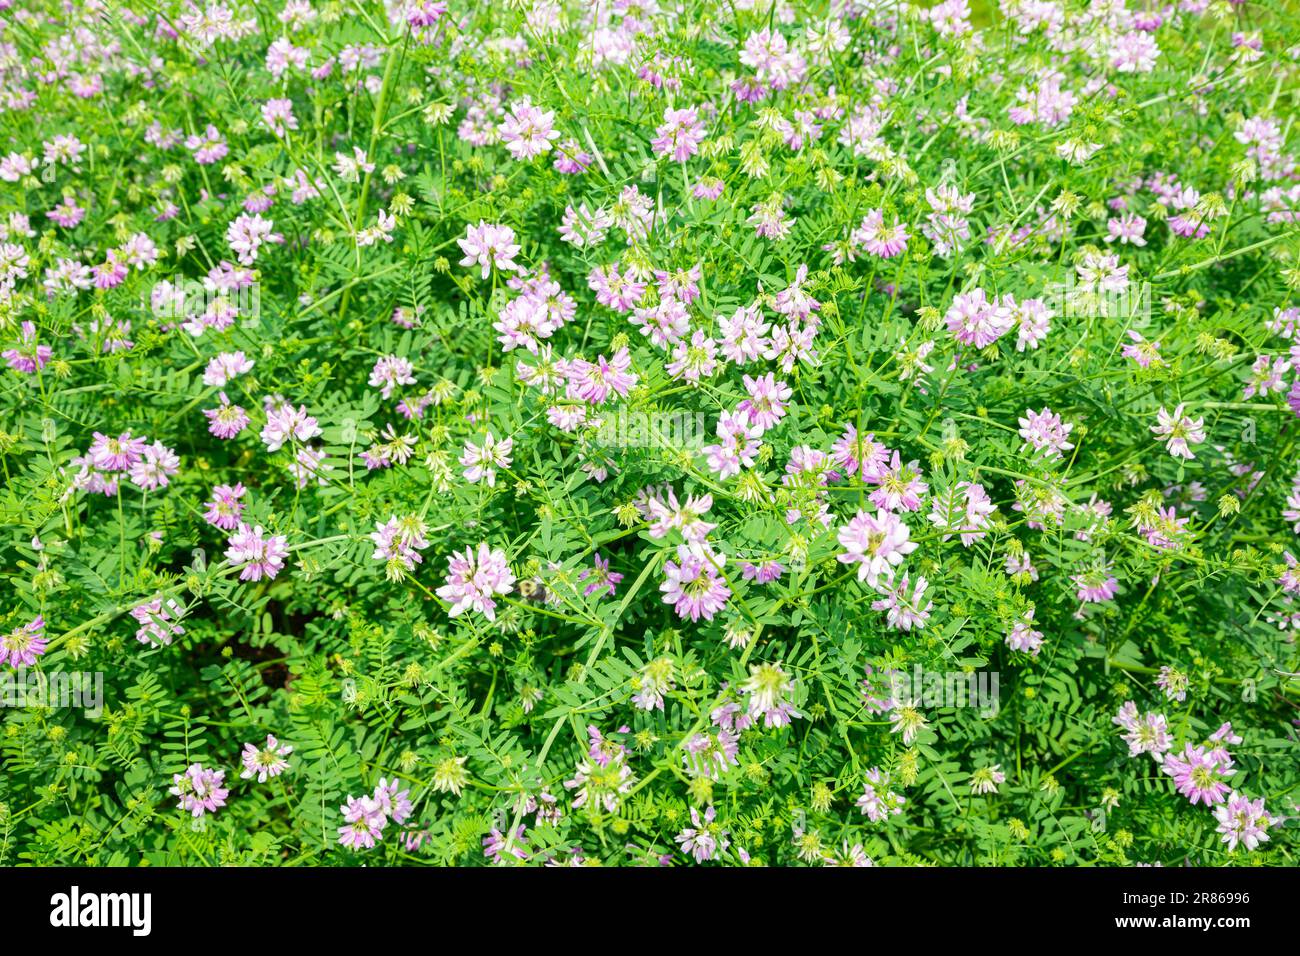 Crownvetch is planted for ground erosion but can be highly invasive in some areas. Stock Photo